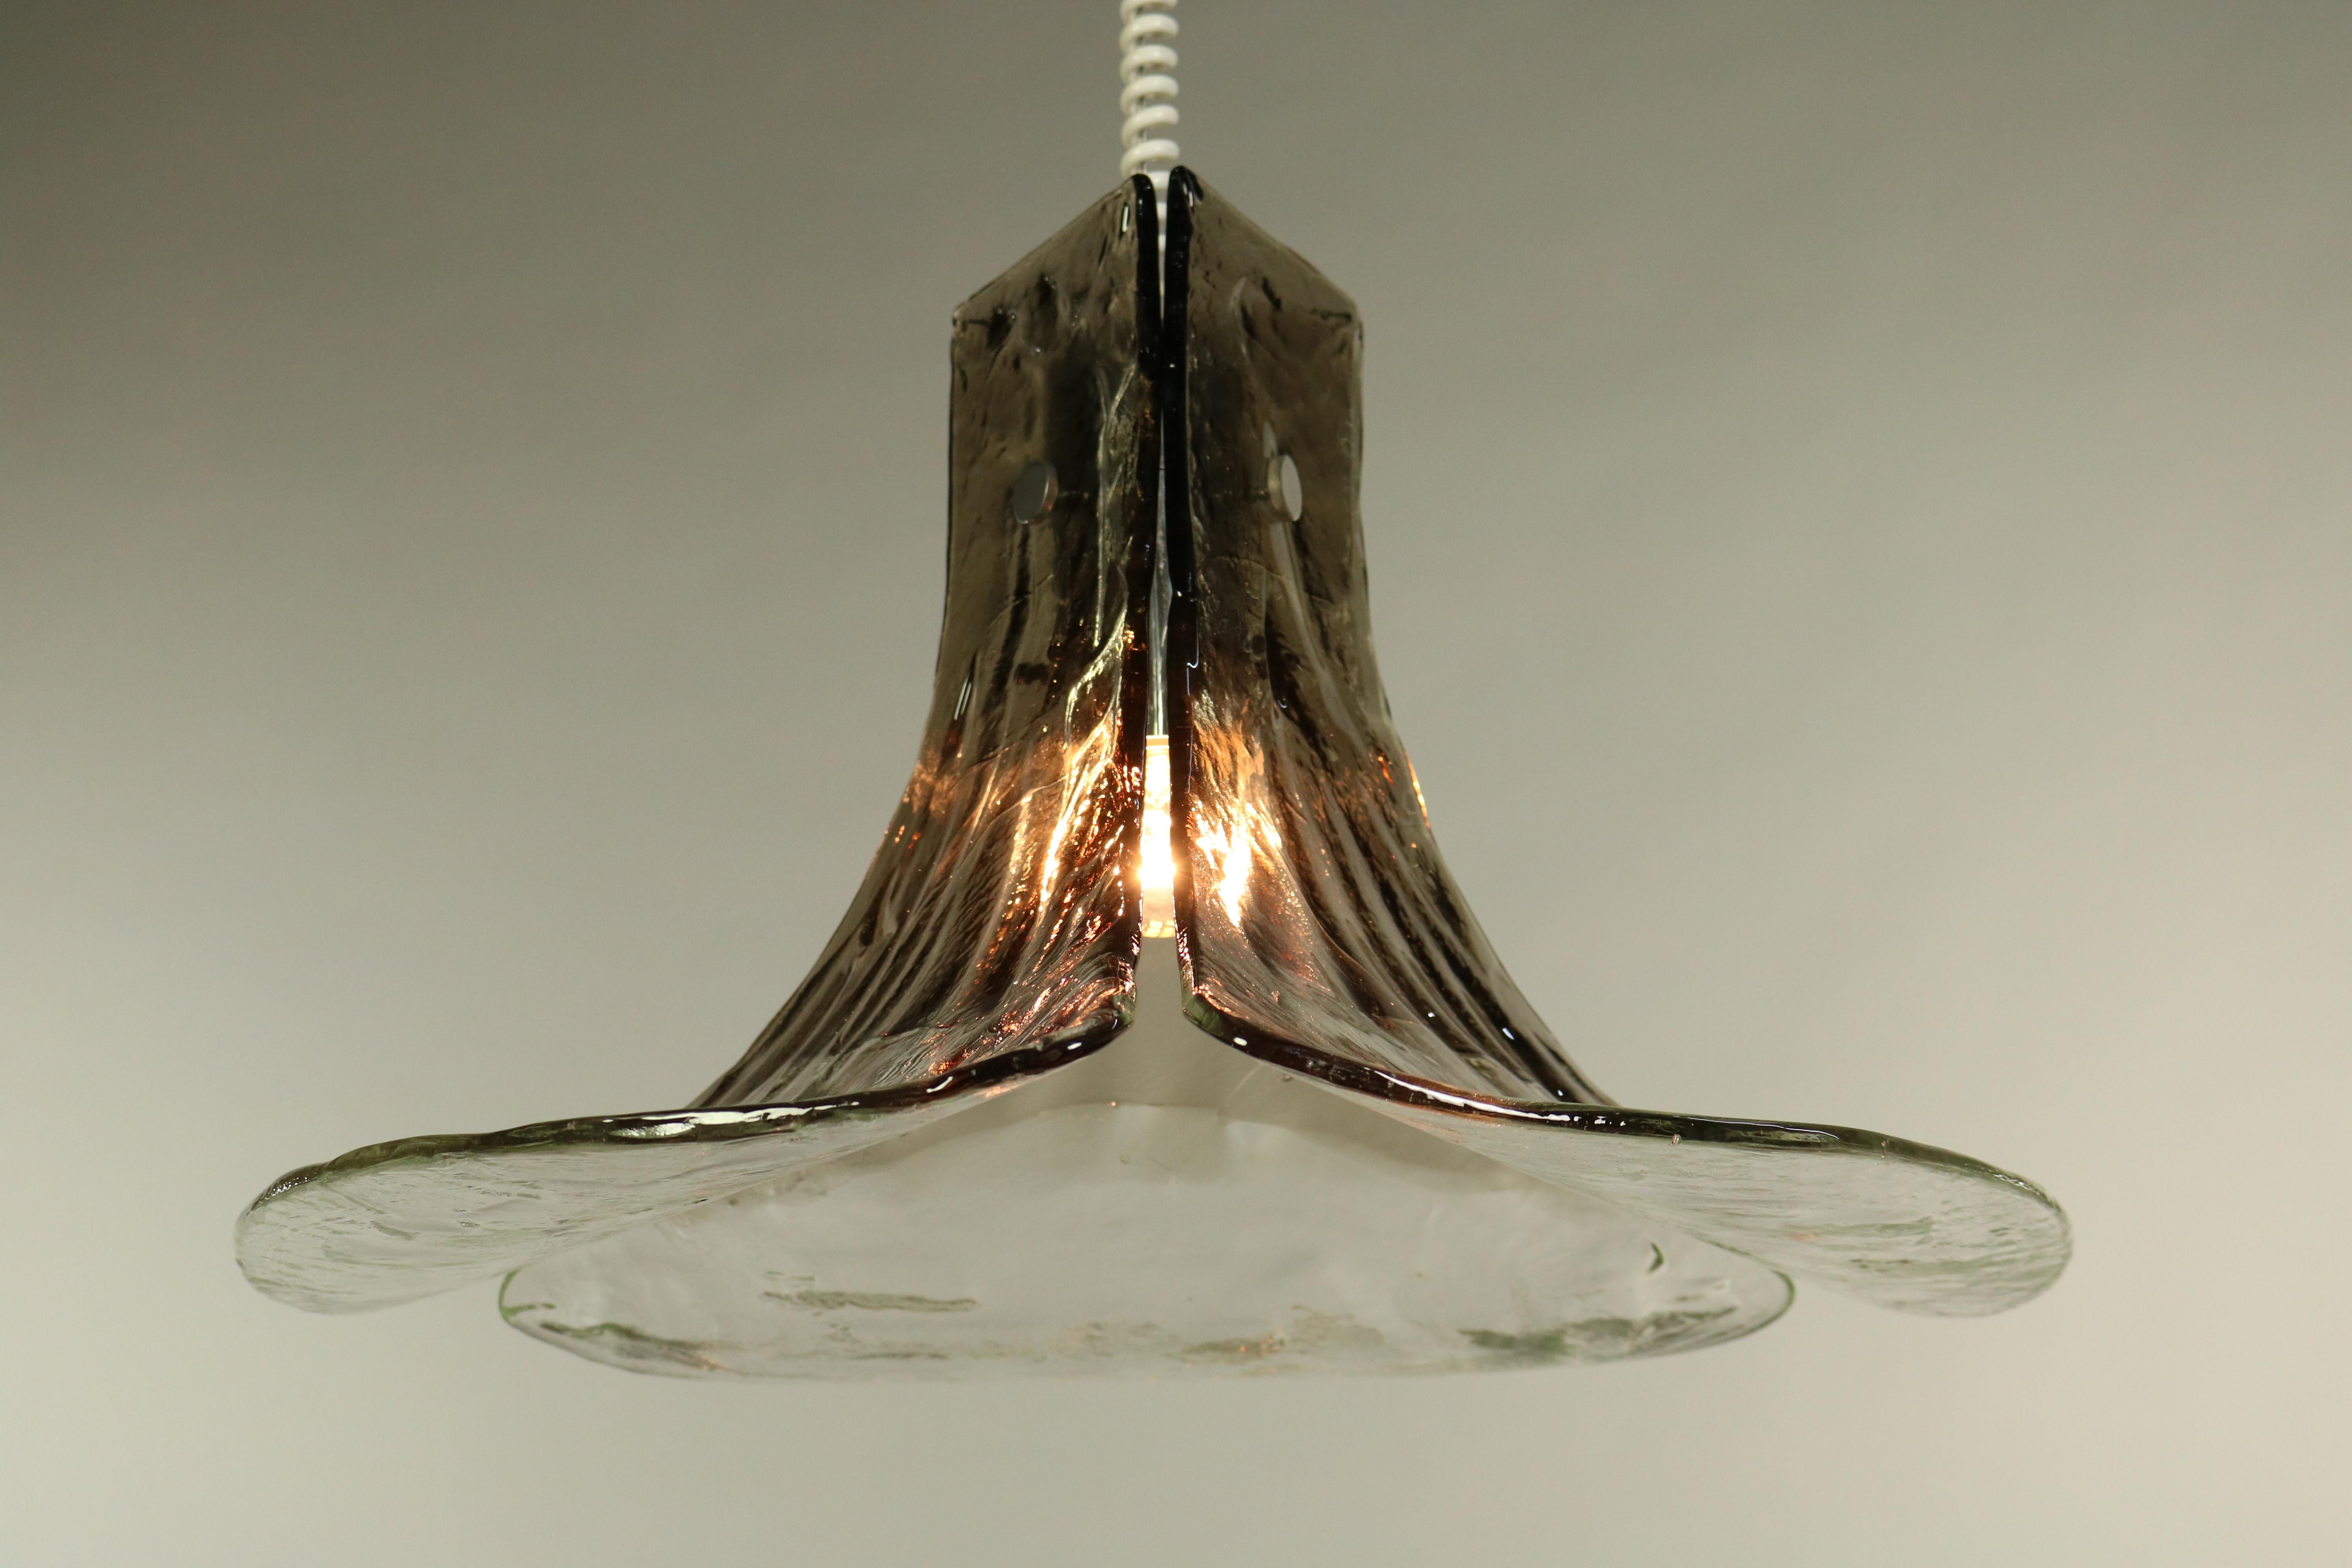 A three leaf shade of thick walled handblown glass 
is mounted to this spectacular chandelier
the design of the individual glass parts reminds to the shape of the leaves of the gingko biloba tree
which was very fashionable in Europe circa